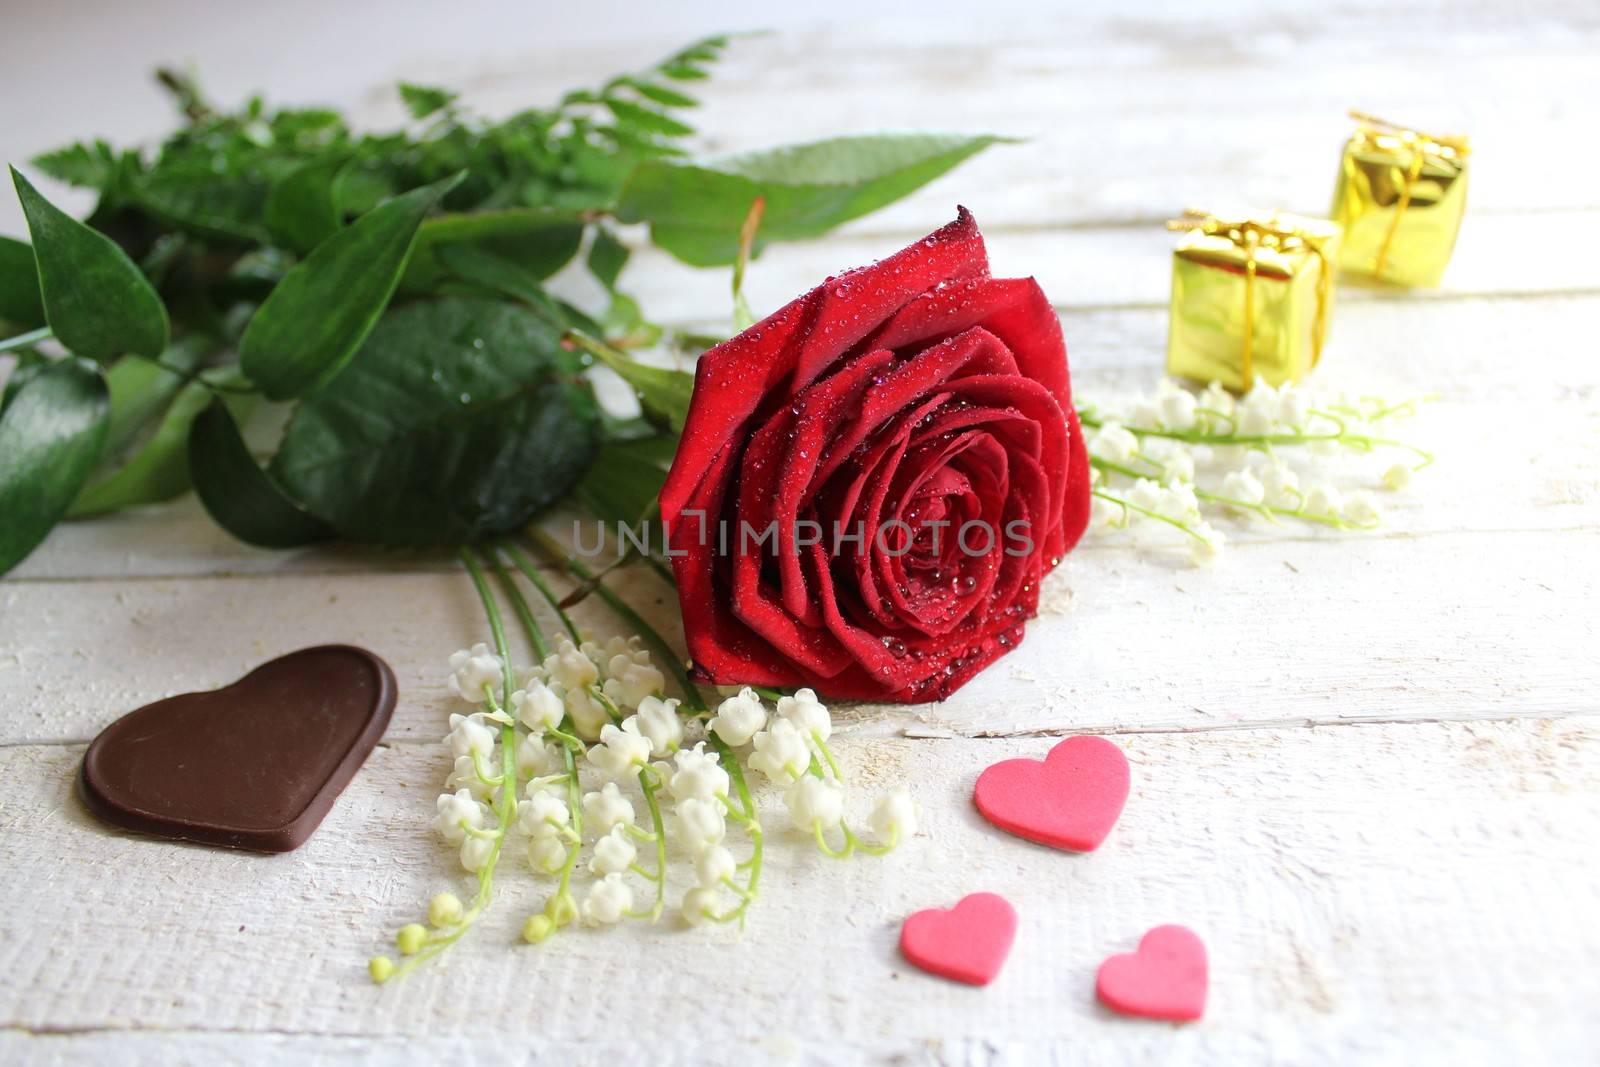 The picture shows flower greetings with hearts and gifts.